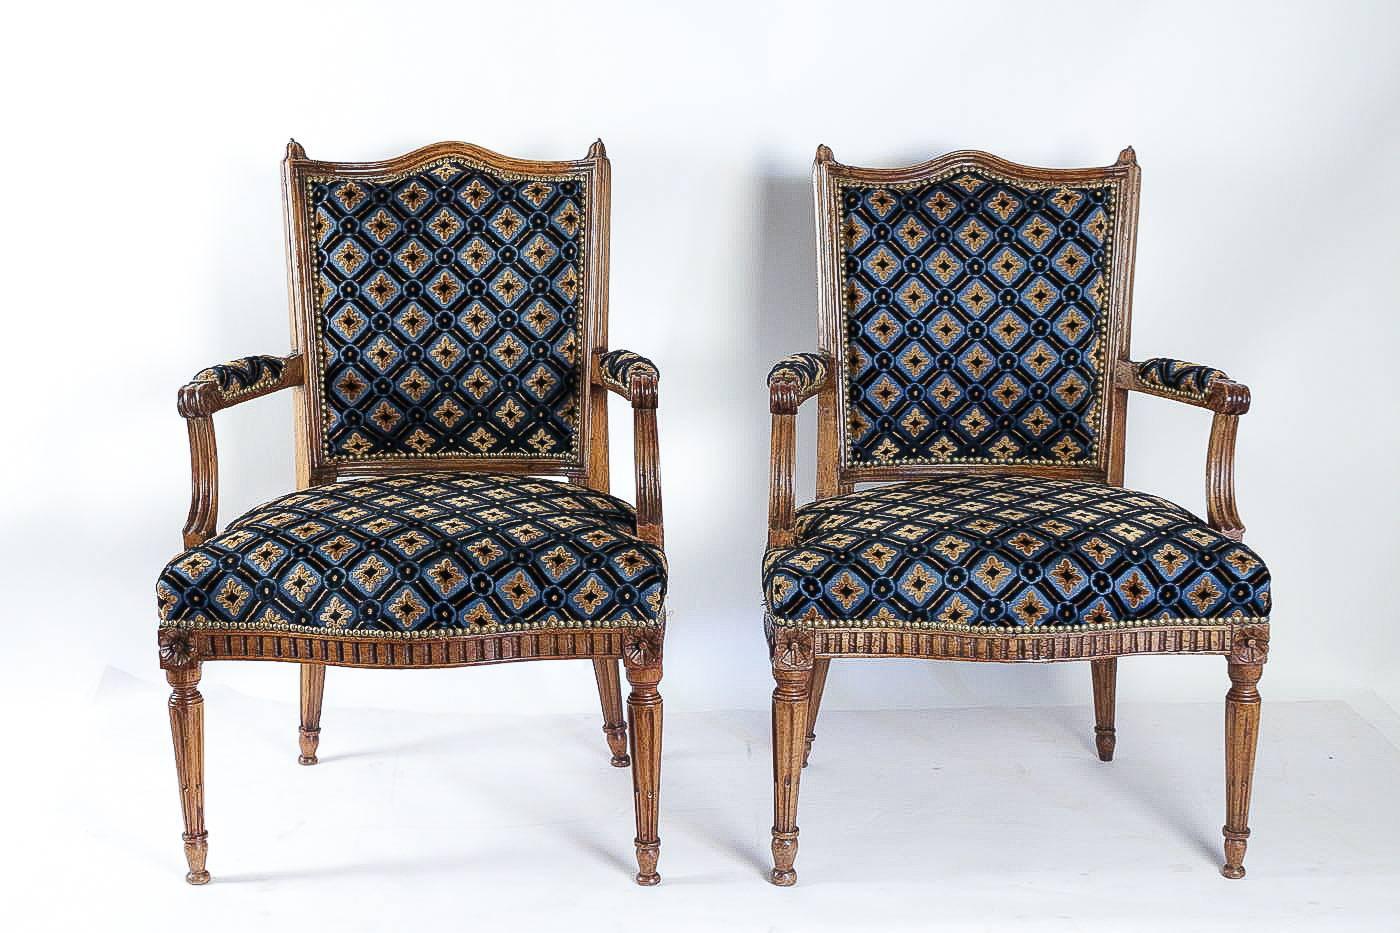 A rare and unique pair of armchairs in hand carved walnut, flower buds and serpentine fronted seat raised on fluted legs.

Elegance and magnificent mastery of the art of the seat in this early-Louis XVI period pair of armchairs. The quality and